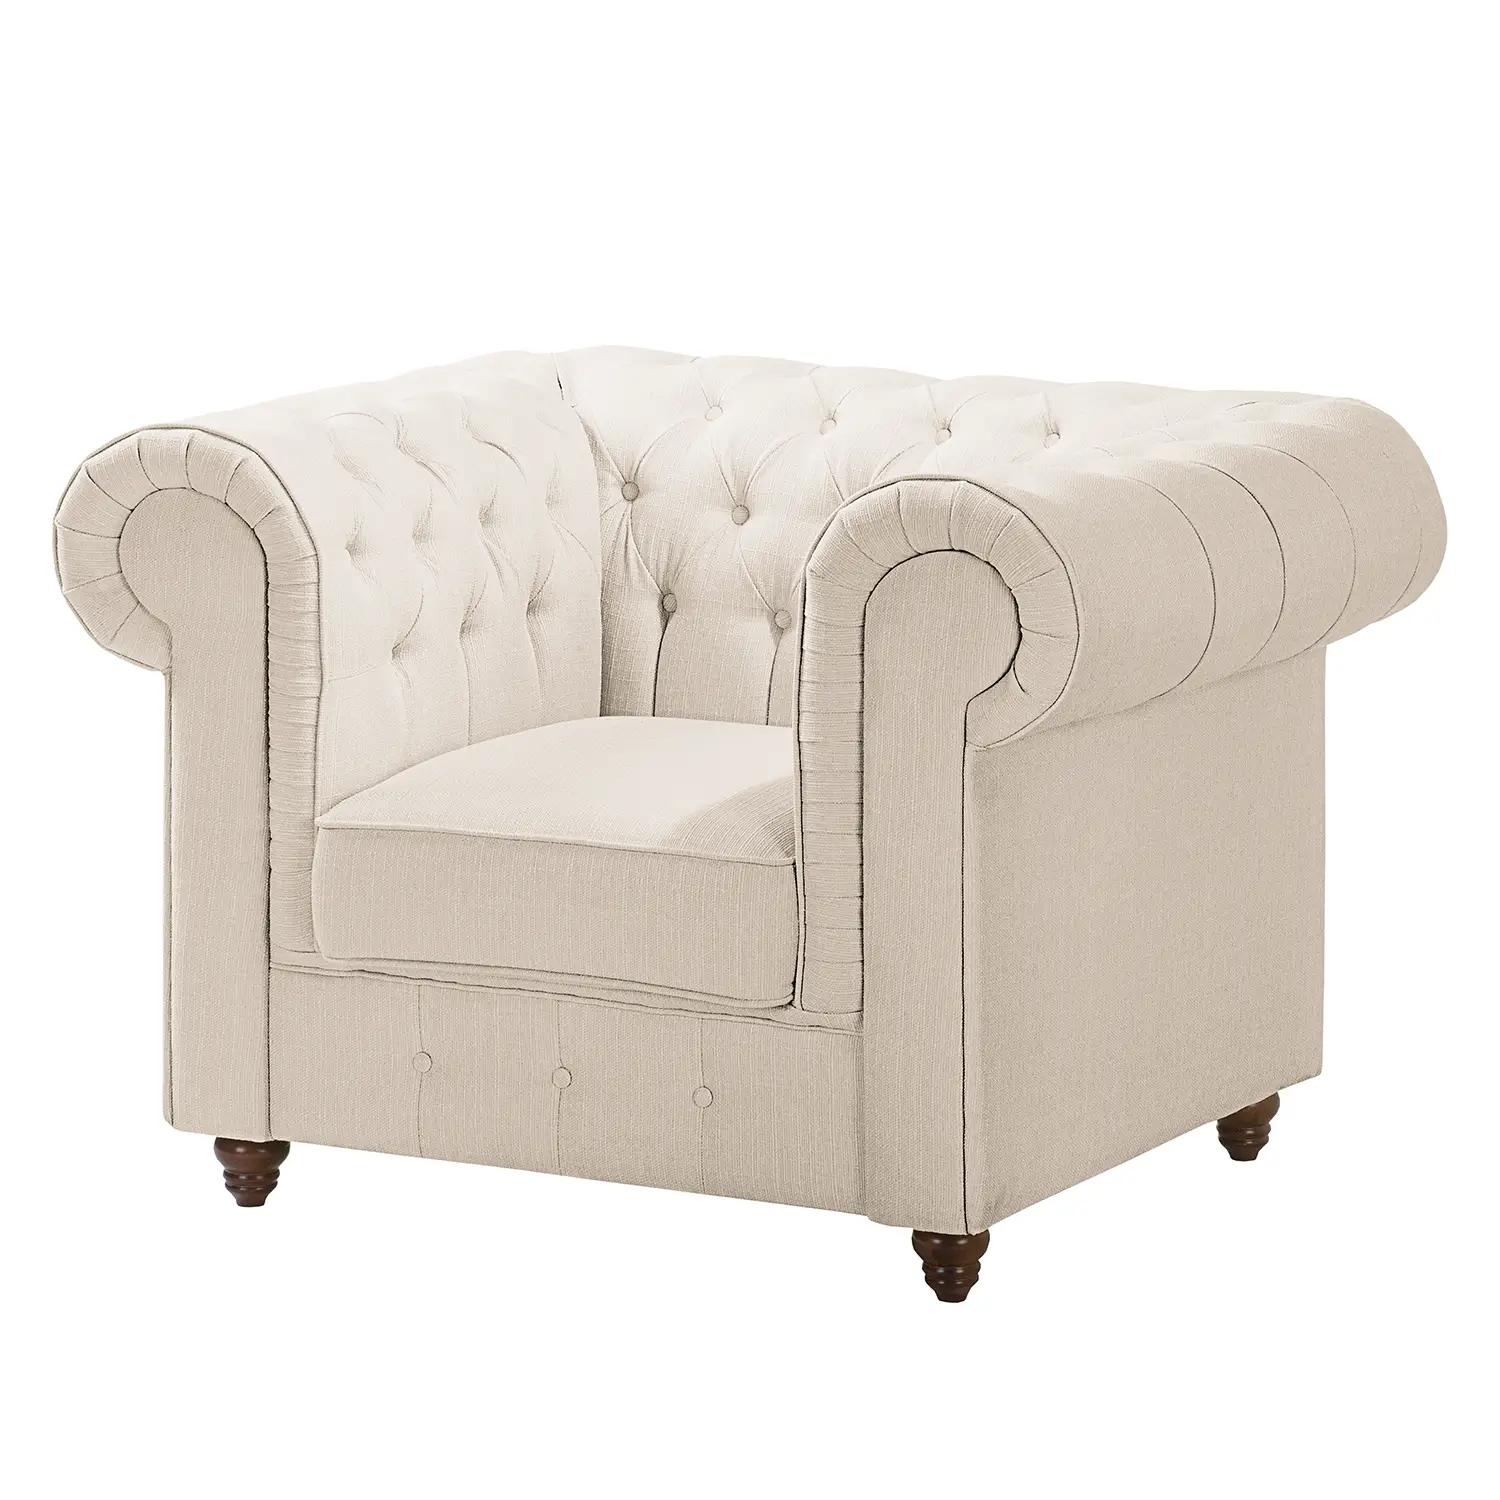 Pintano Sessel Chesterfield